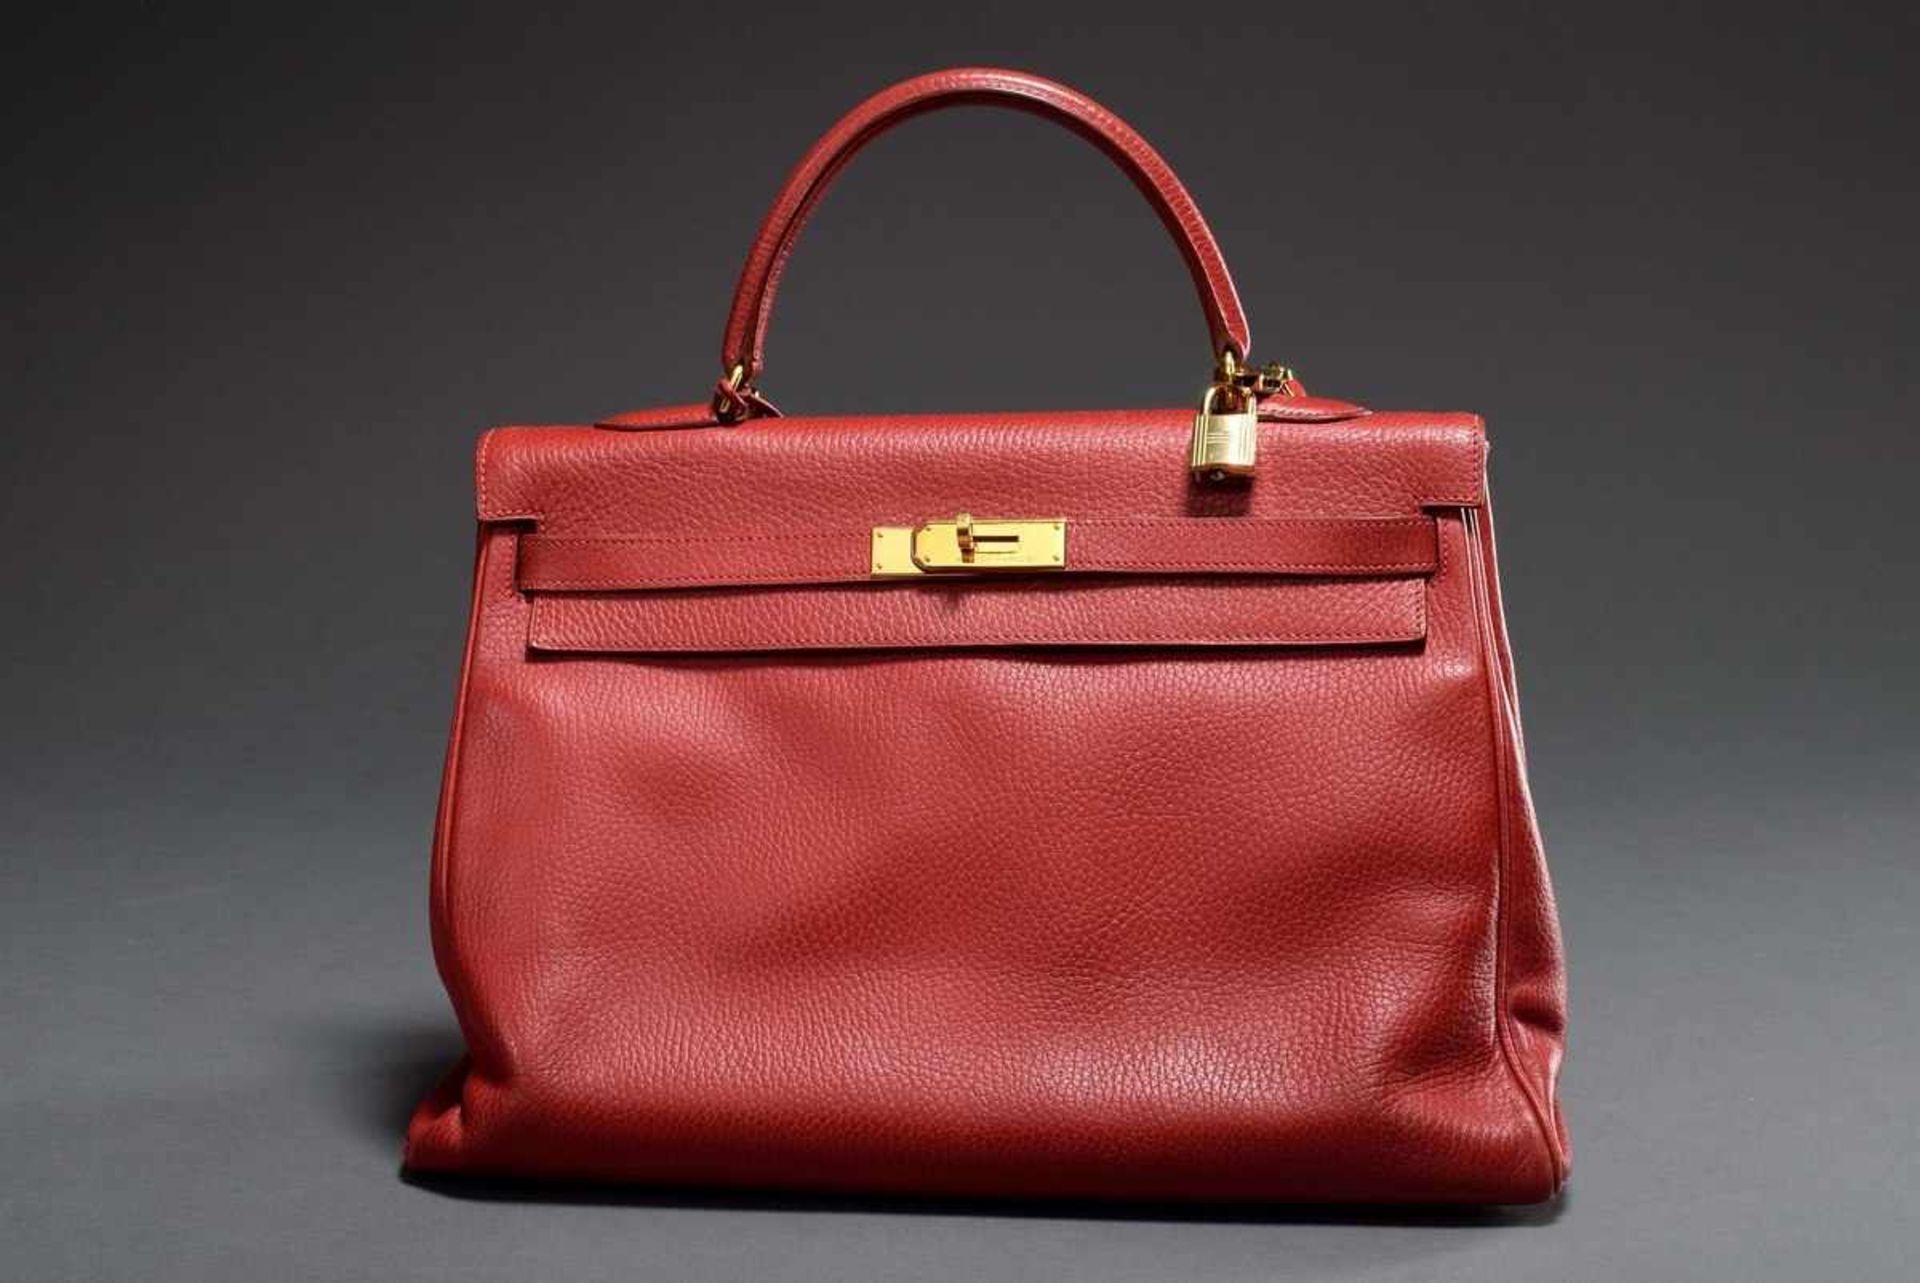 Hermès "Kelly Bag Souple 35", 1998, red calfskin, trapezoid body with arched handle, flap with - Bild 2 aus 8